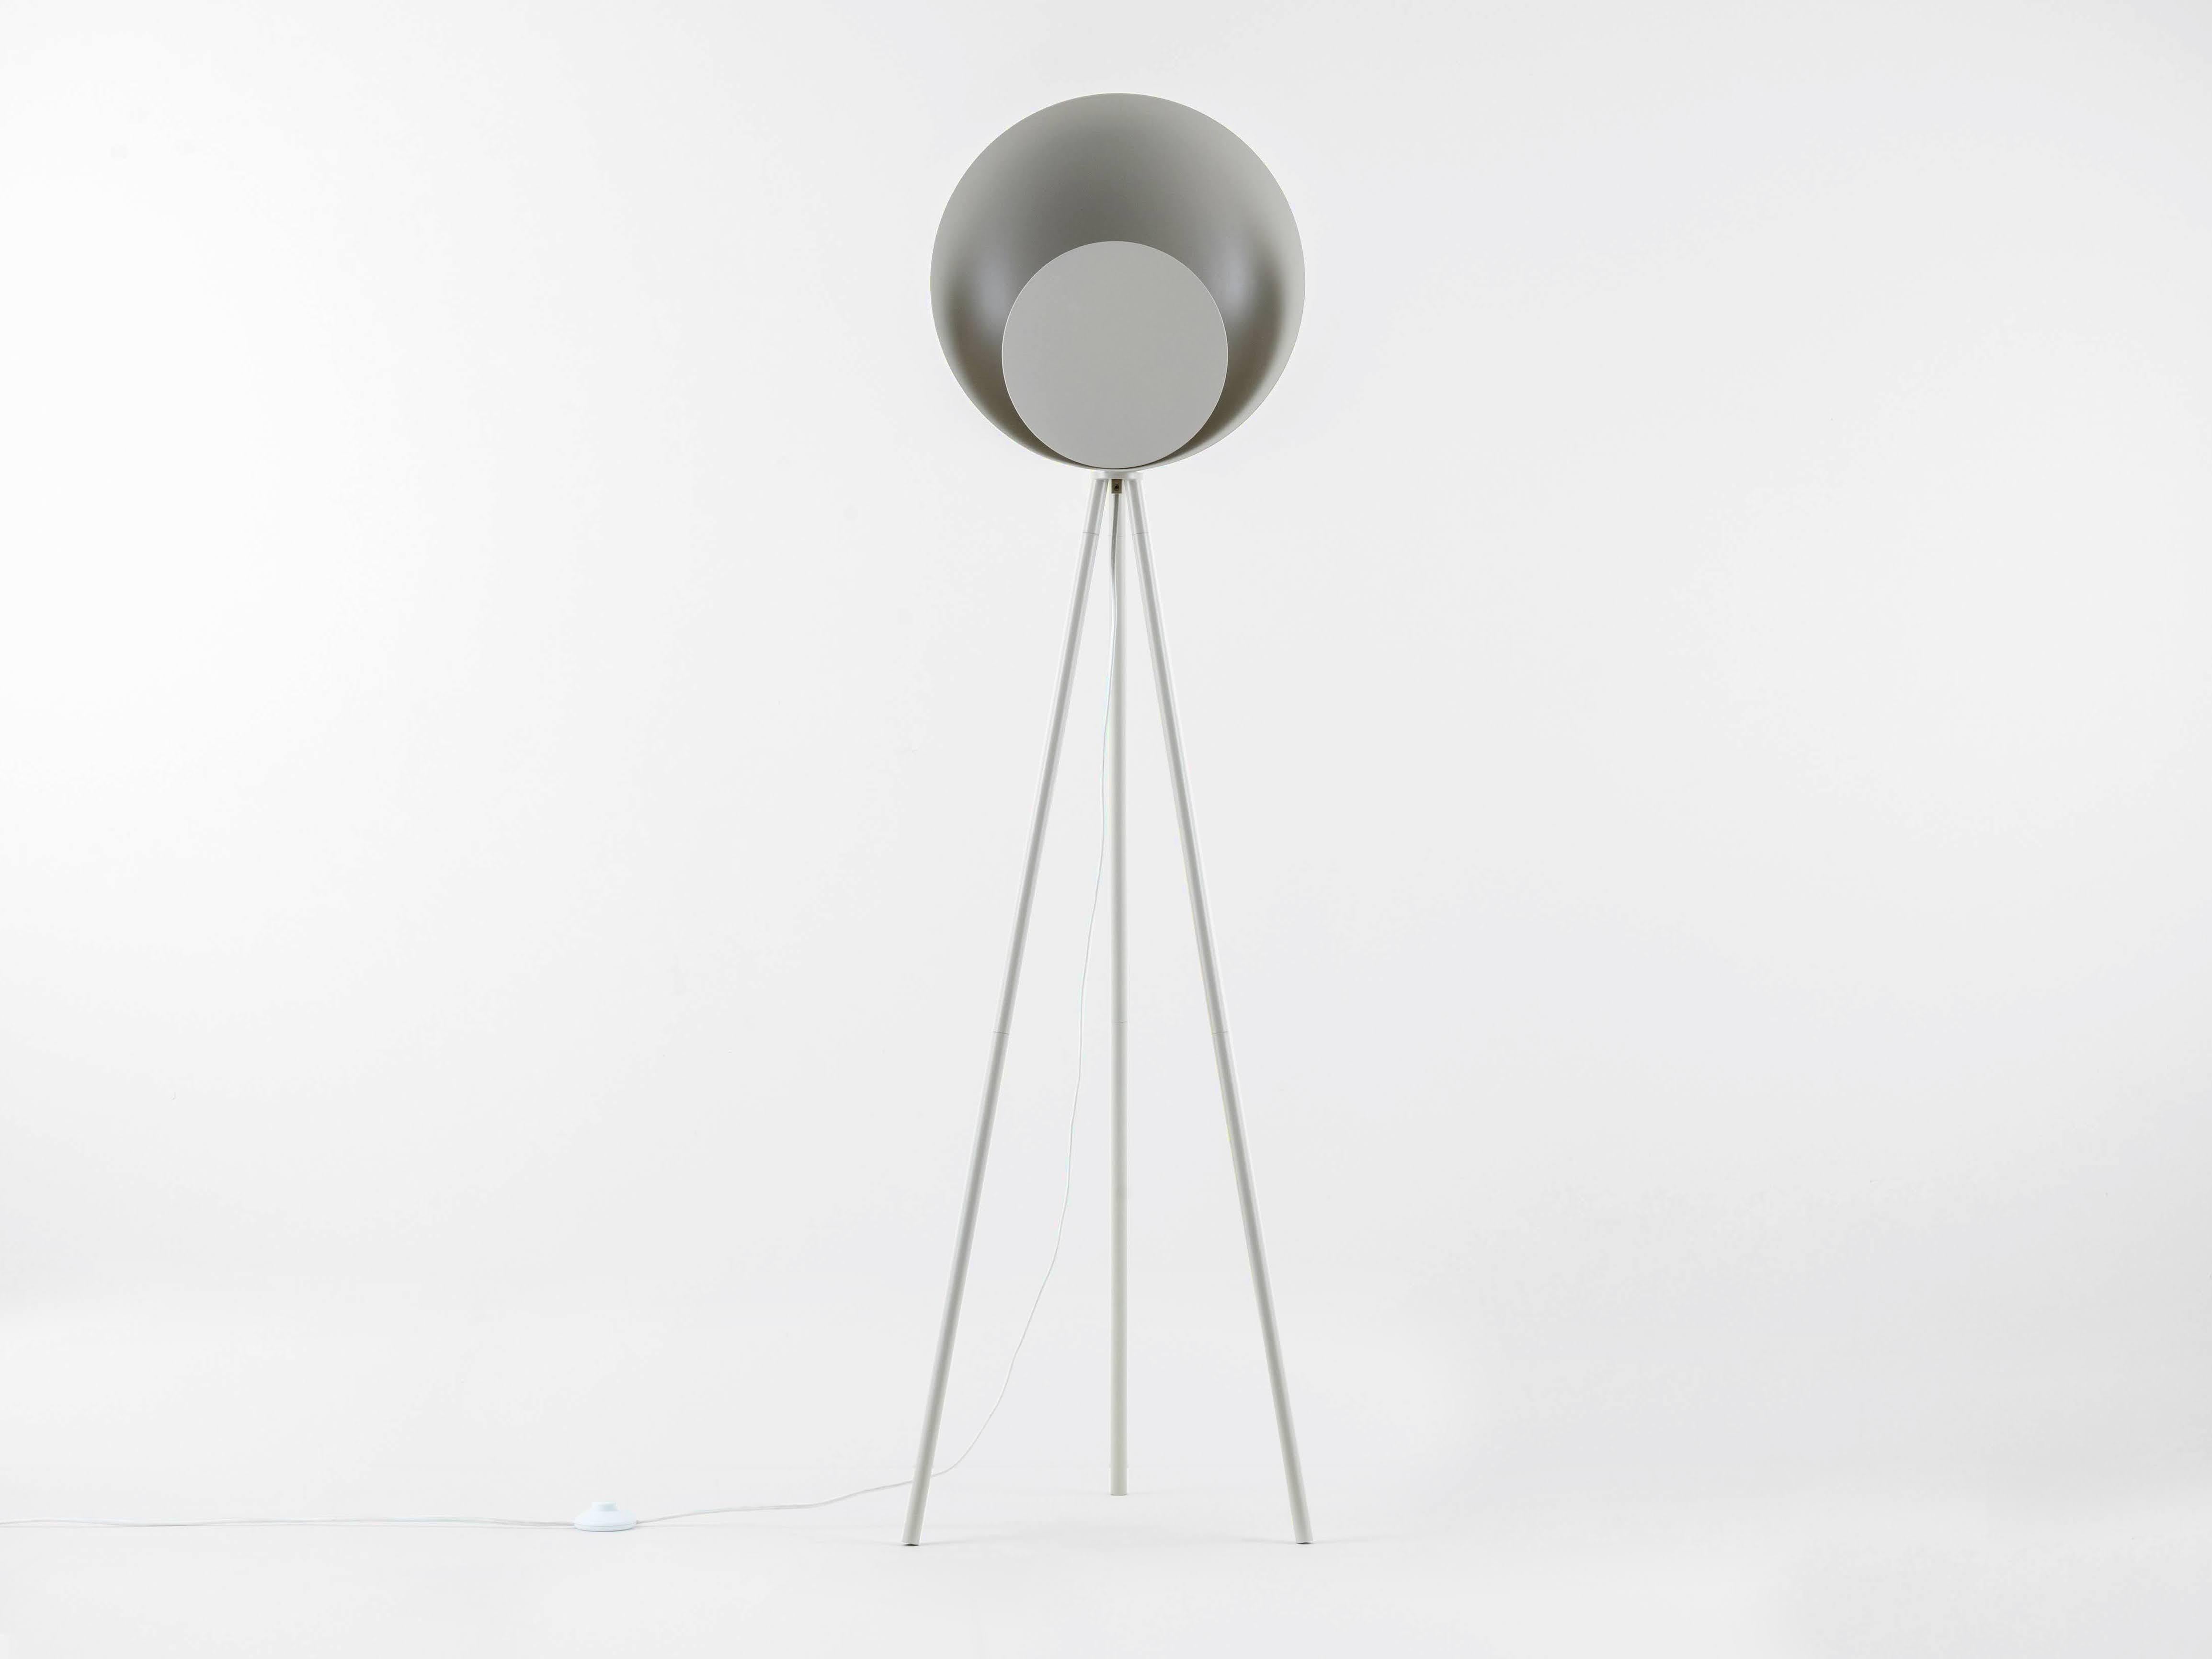 A houseof icon, this statement lamp has become a favourite, combining soft ambient lighting and pop-art shapes. Sitting on a tripod base, the oversized dome shade diffuses the light to create the perfect glow. Sand is the houseof staple that